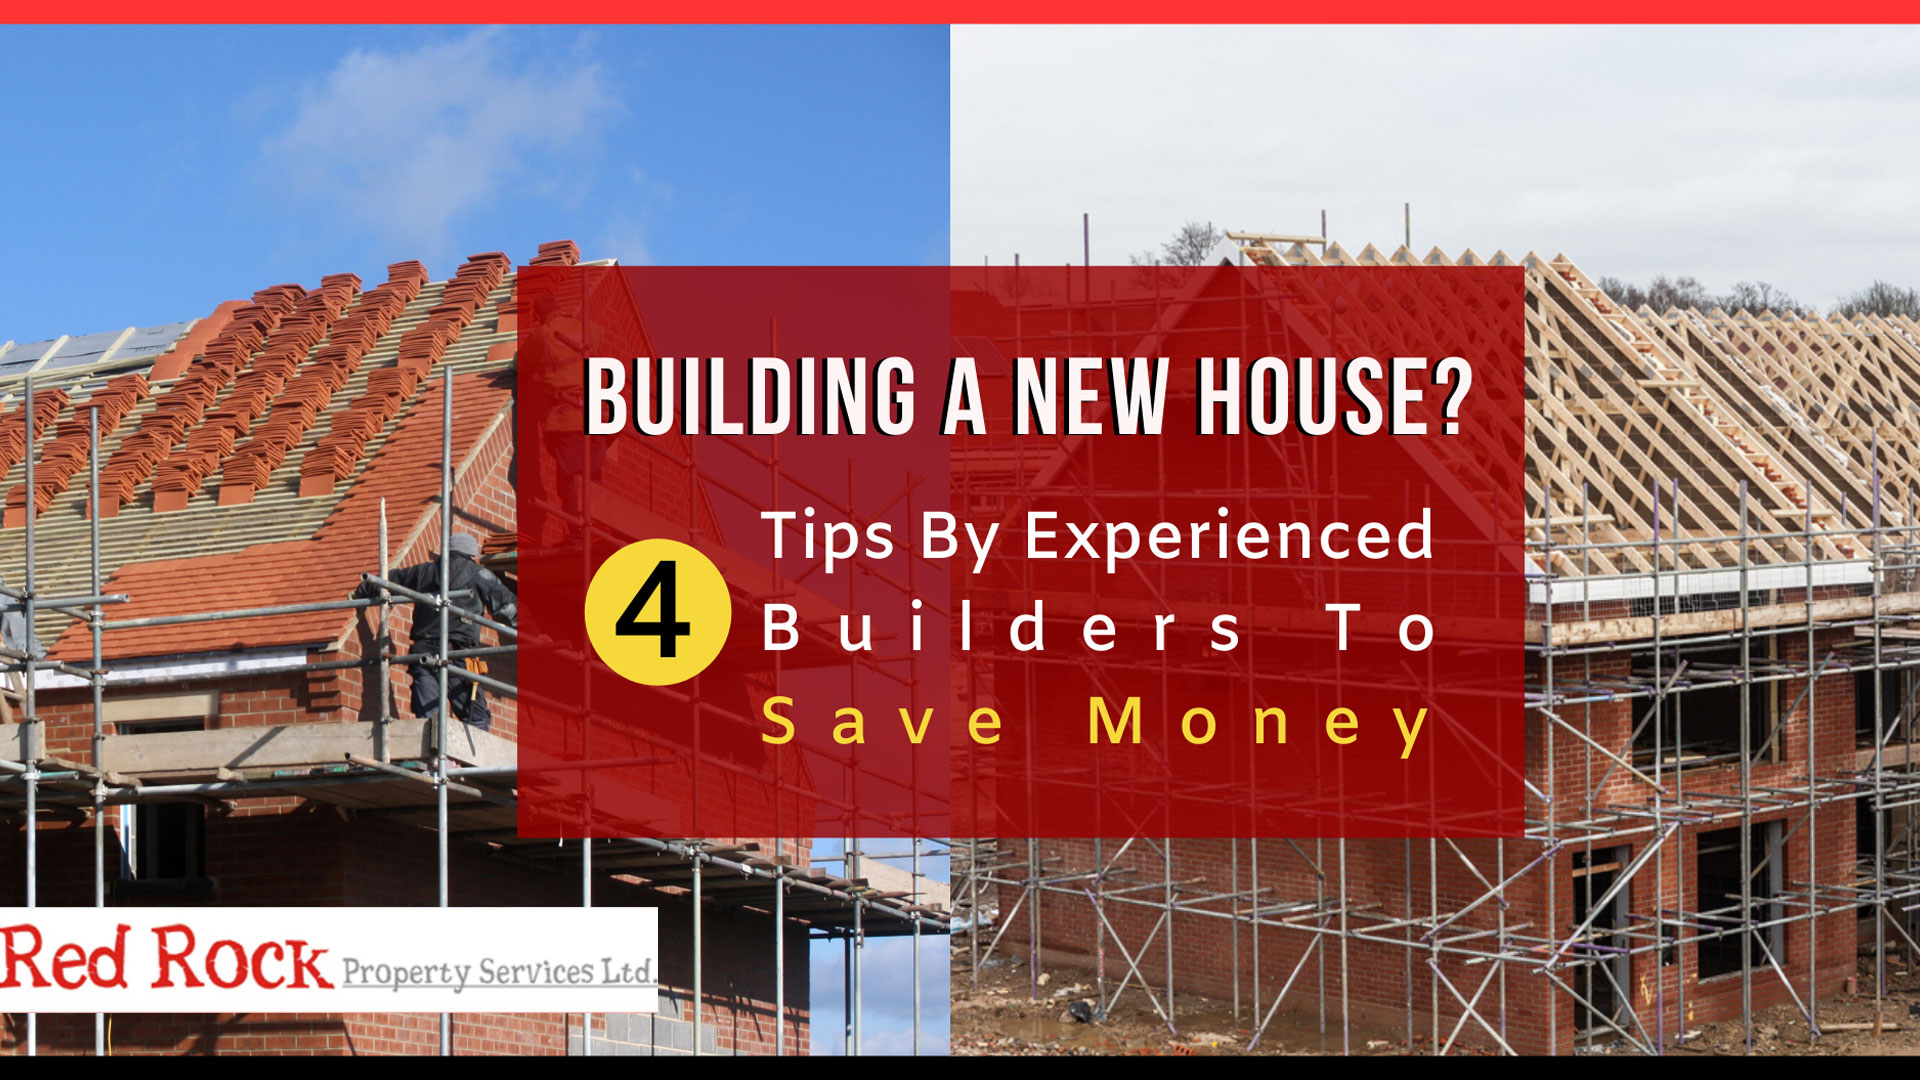 4-tips-by-experienced-builders-to-save-money